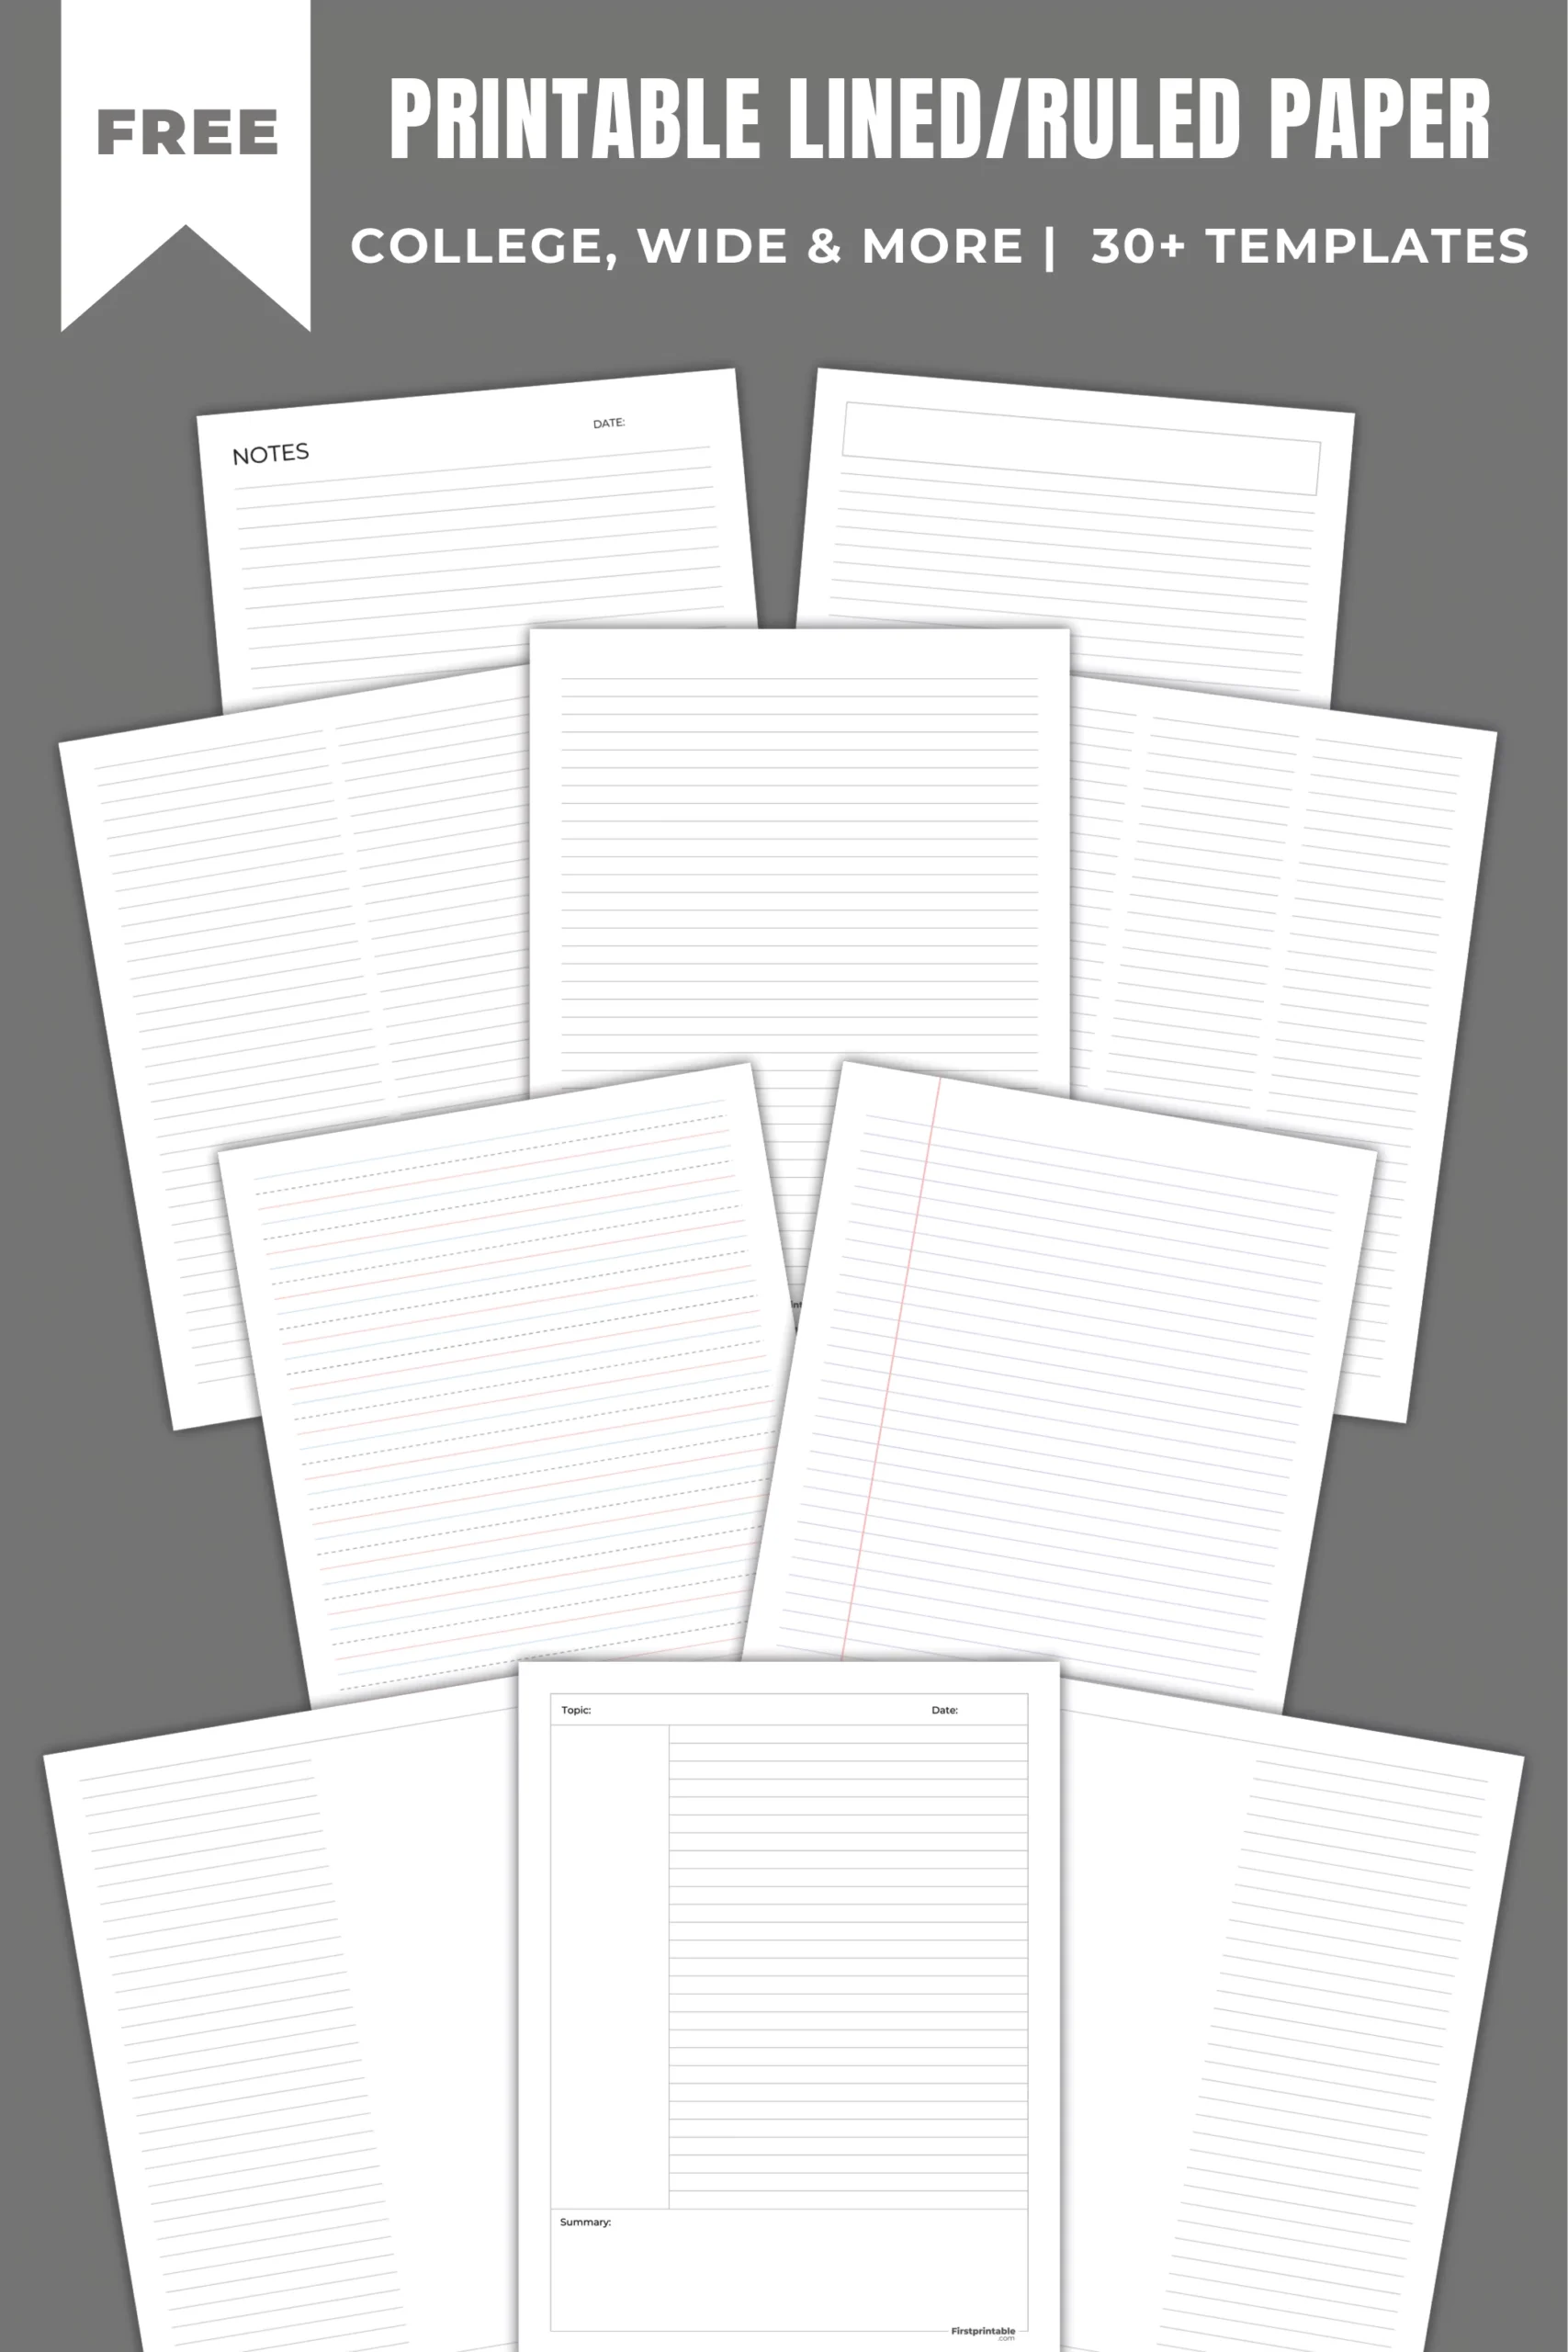 Free Printable Lined Paper - 30 Ruled Templates Montage